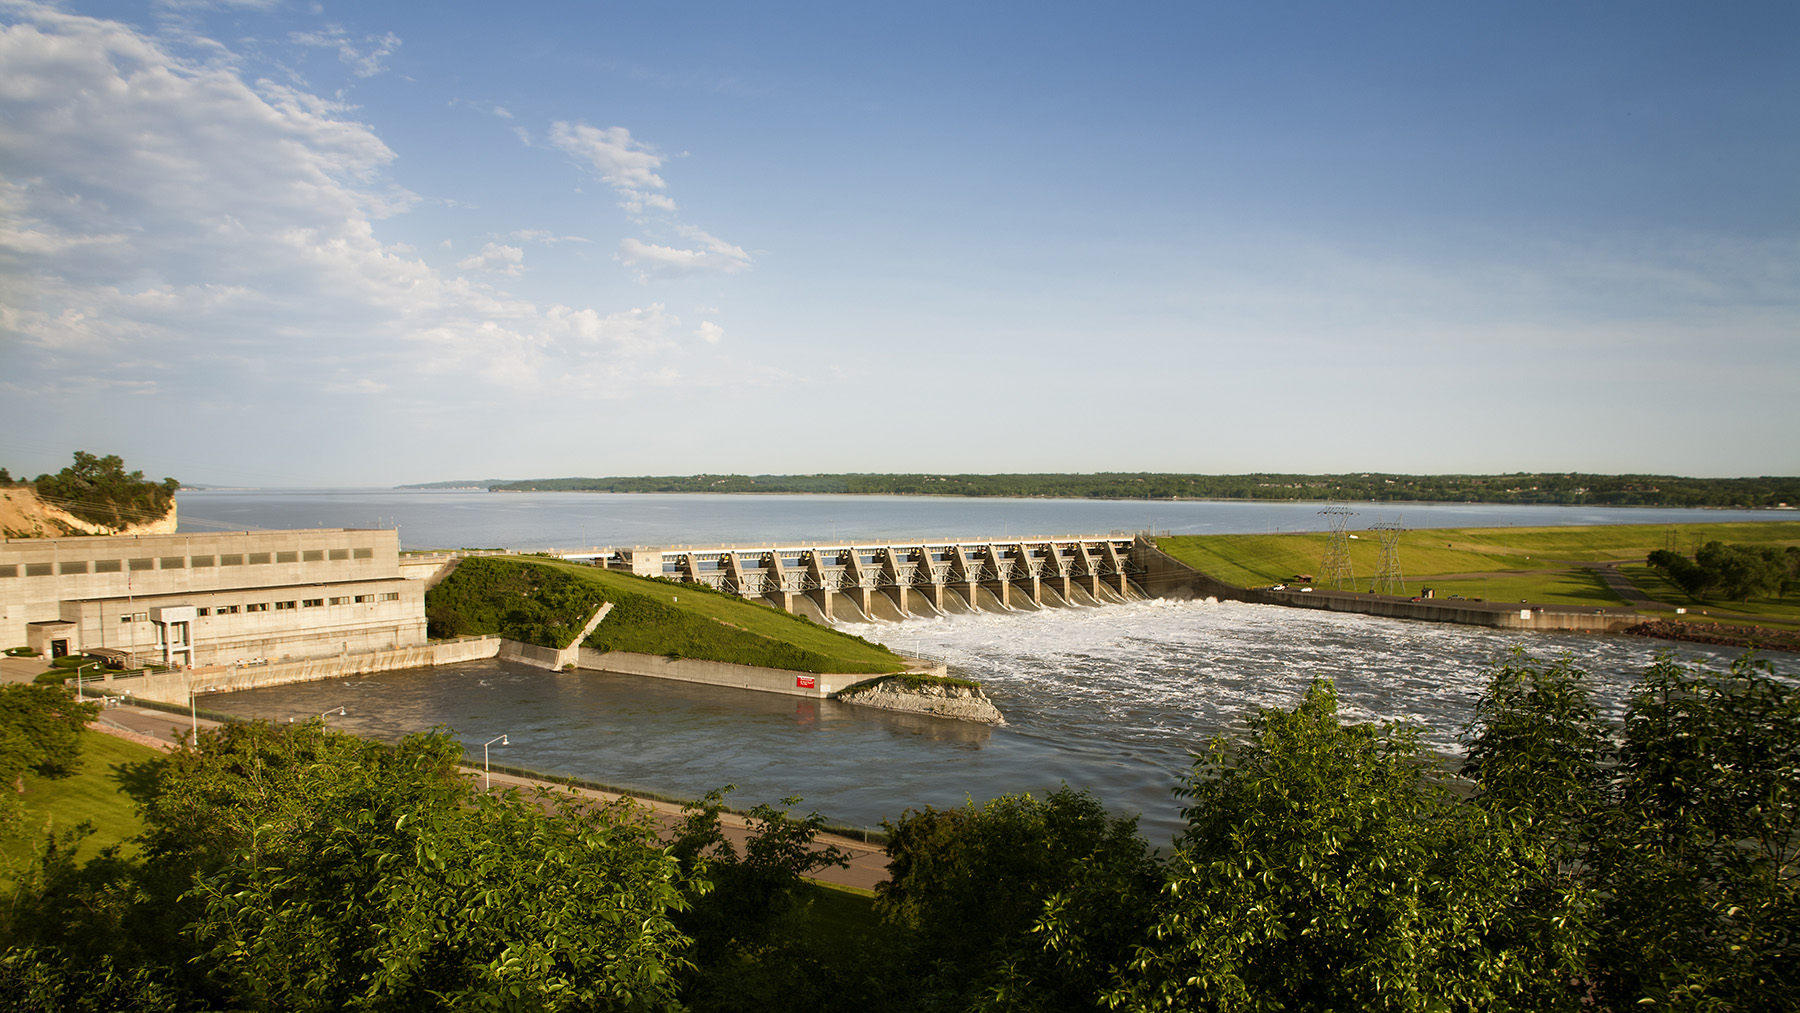 ): Image shows a lake impounded by a dam. Water rushes through the dam’s gates. 